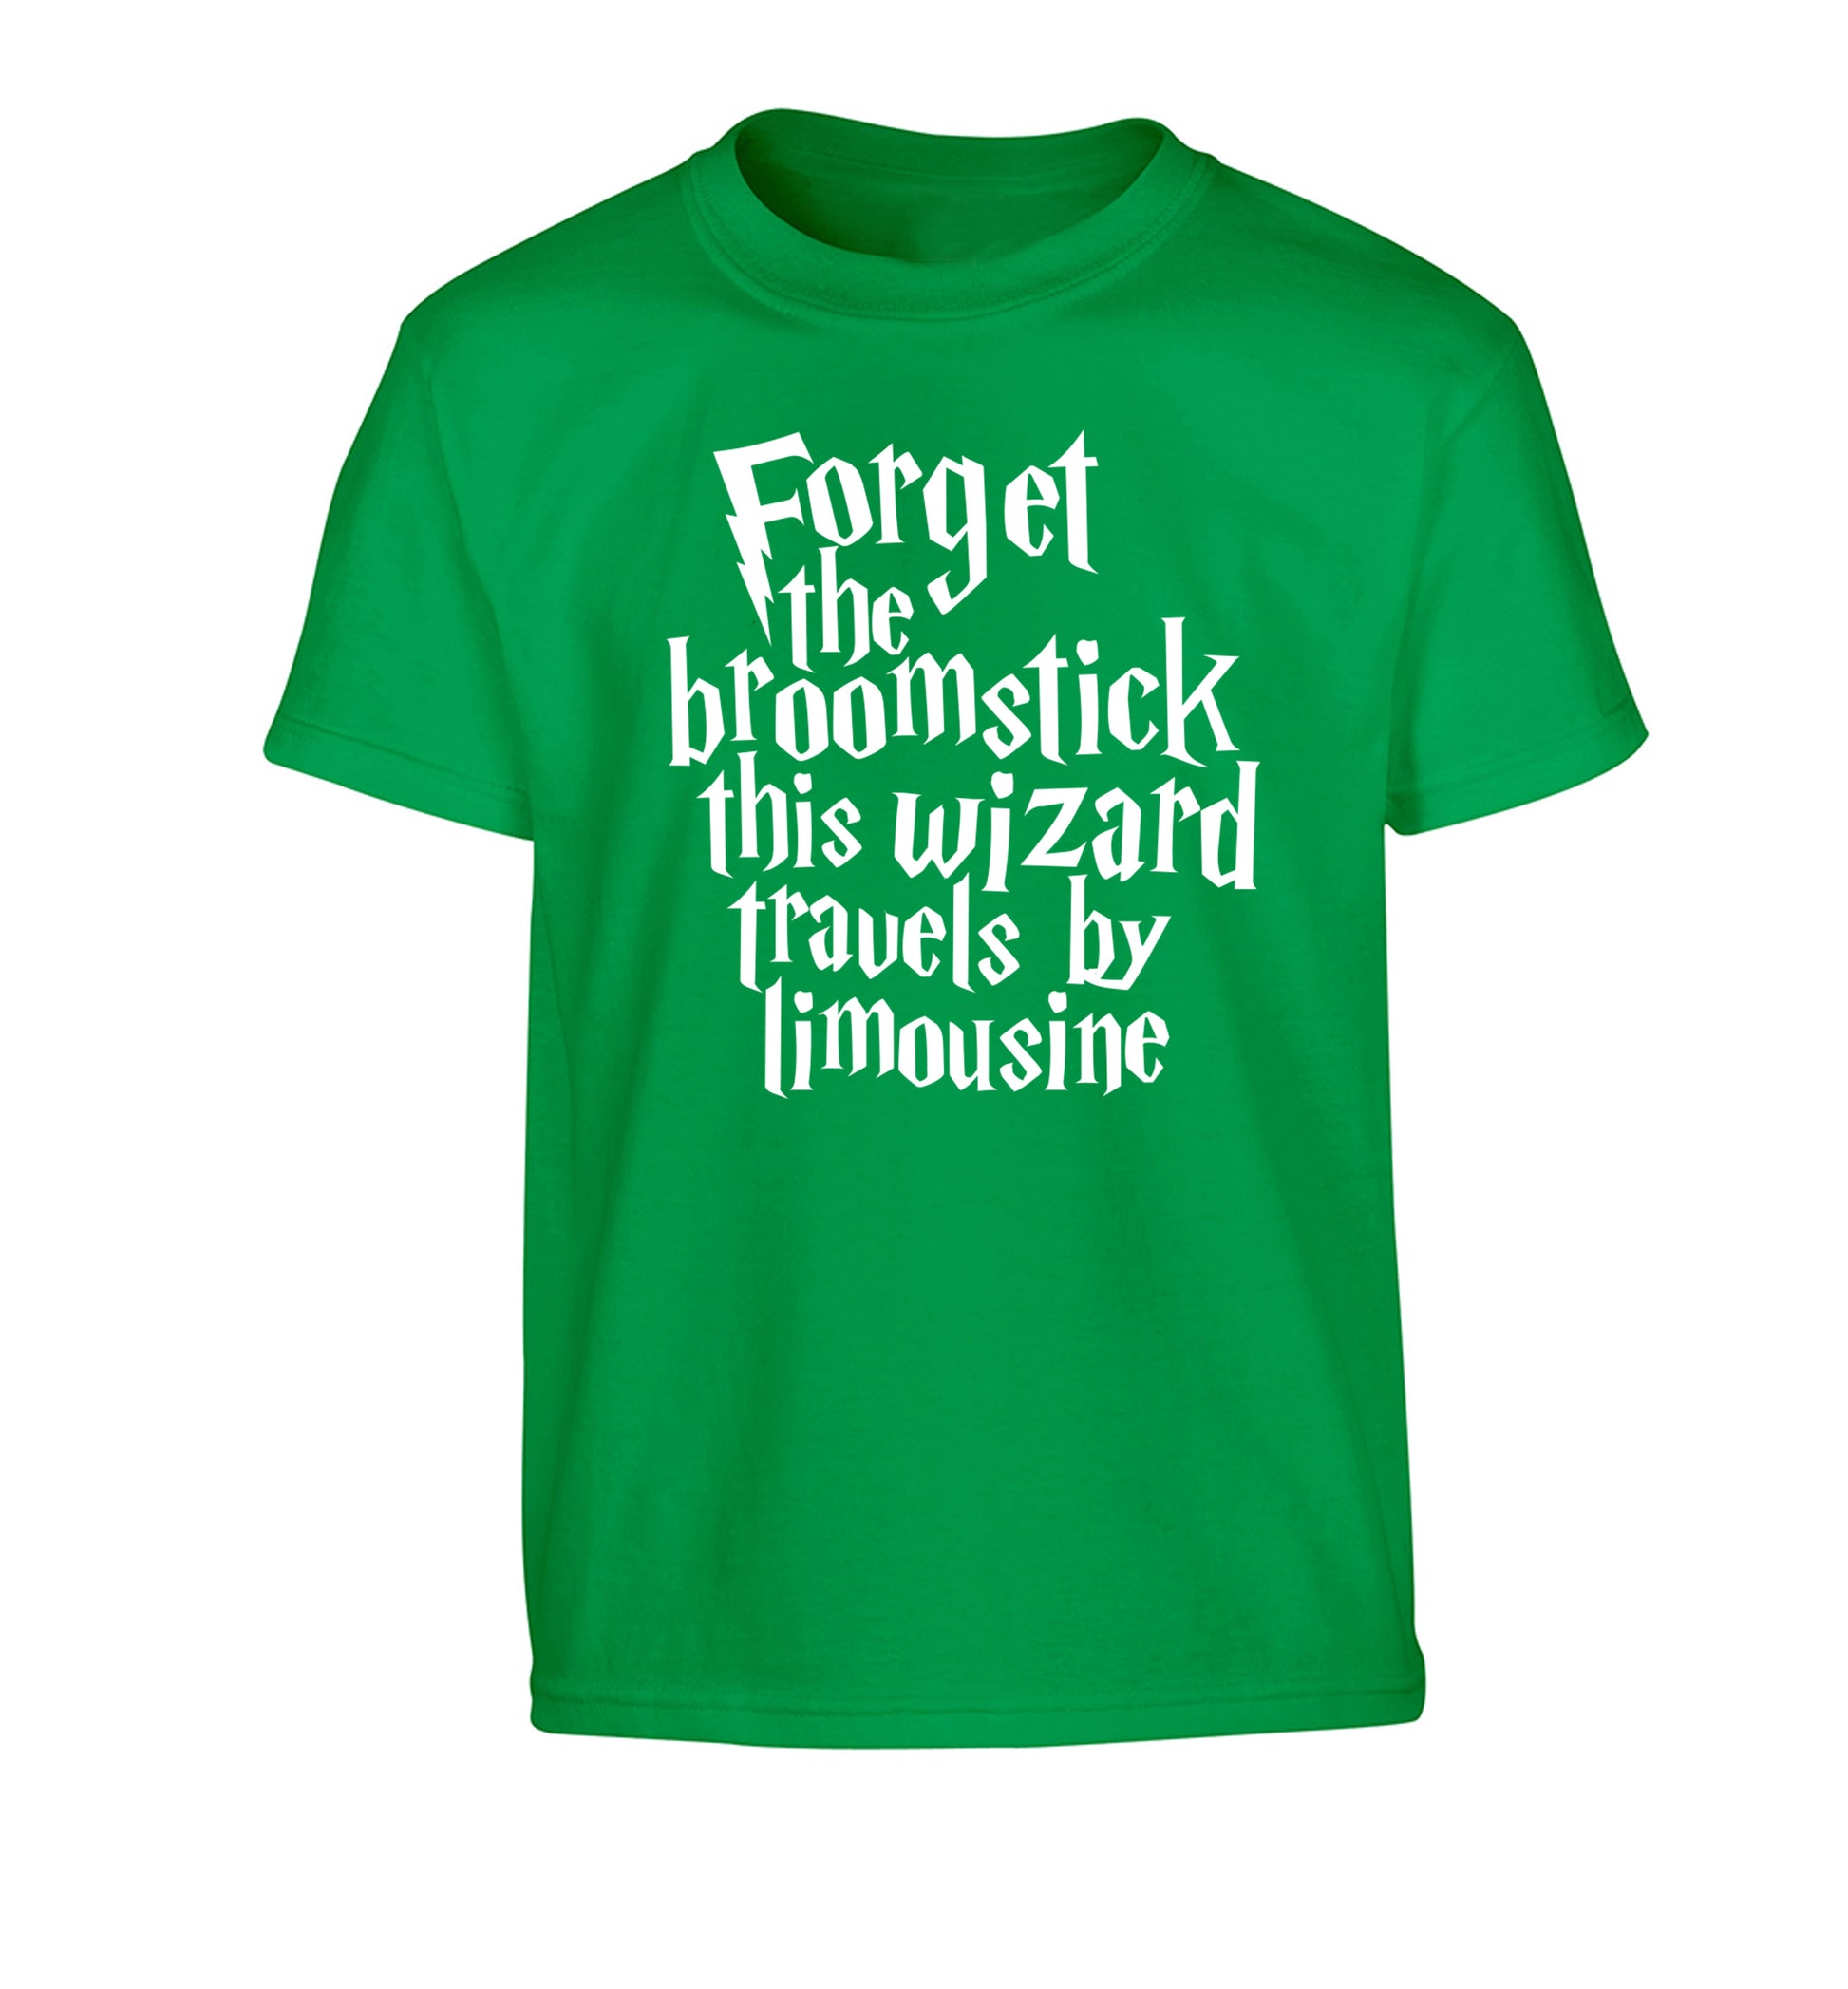 Forget the broomstick this wizard travels by limousine Children's green Tshirt 12-14 Years